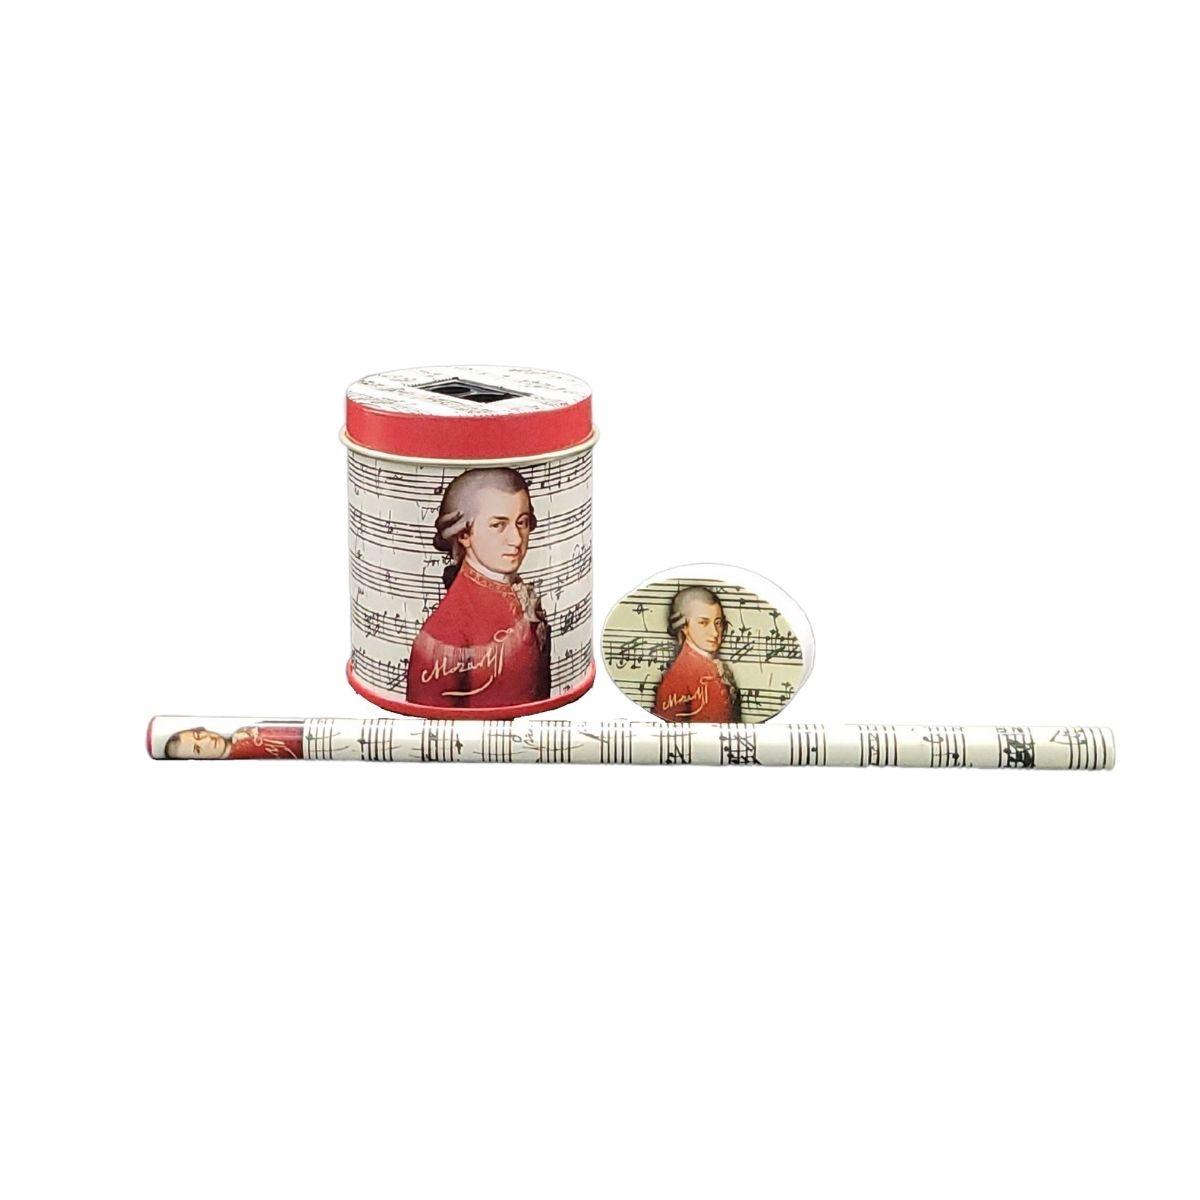 Mozart writing set with pencil, sharpener and eraser